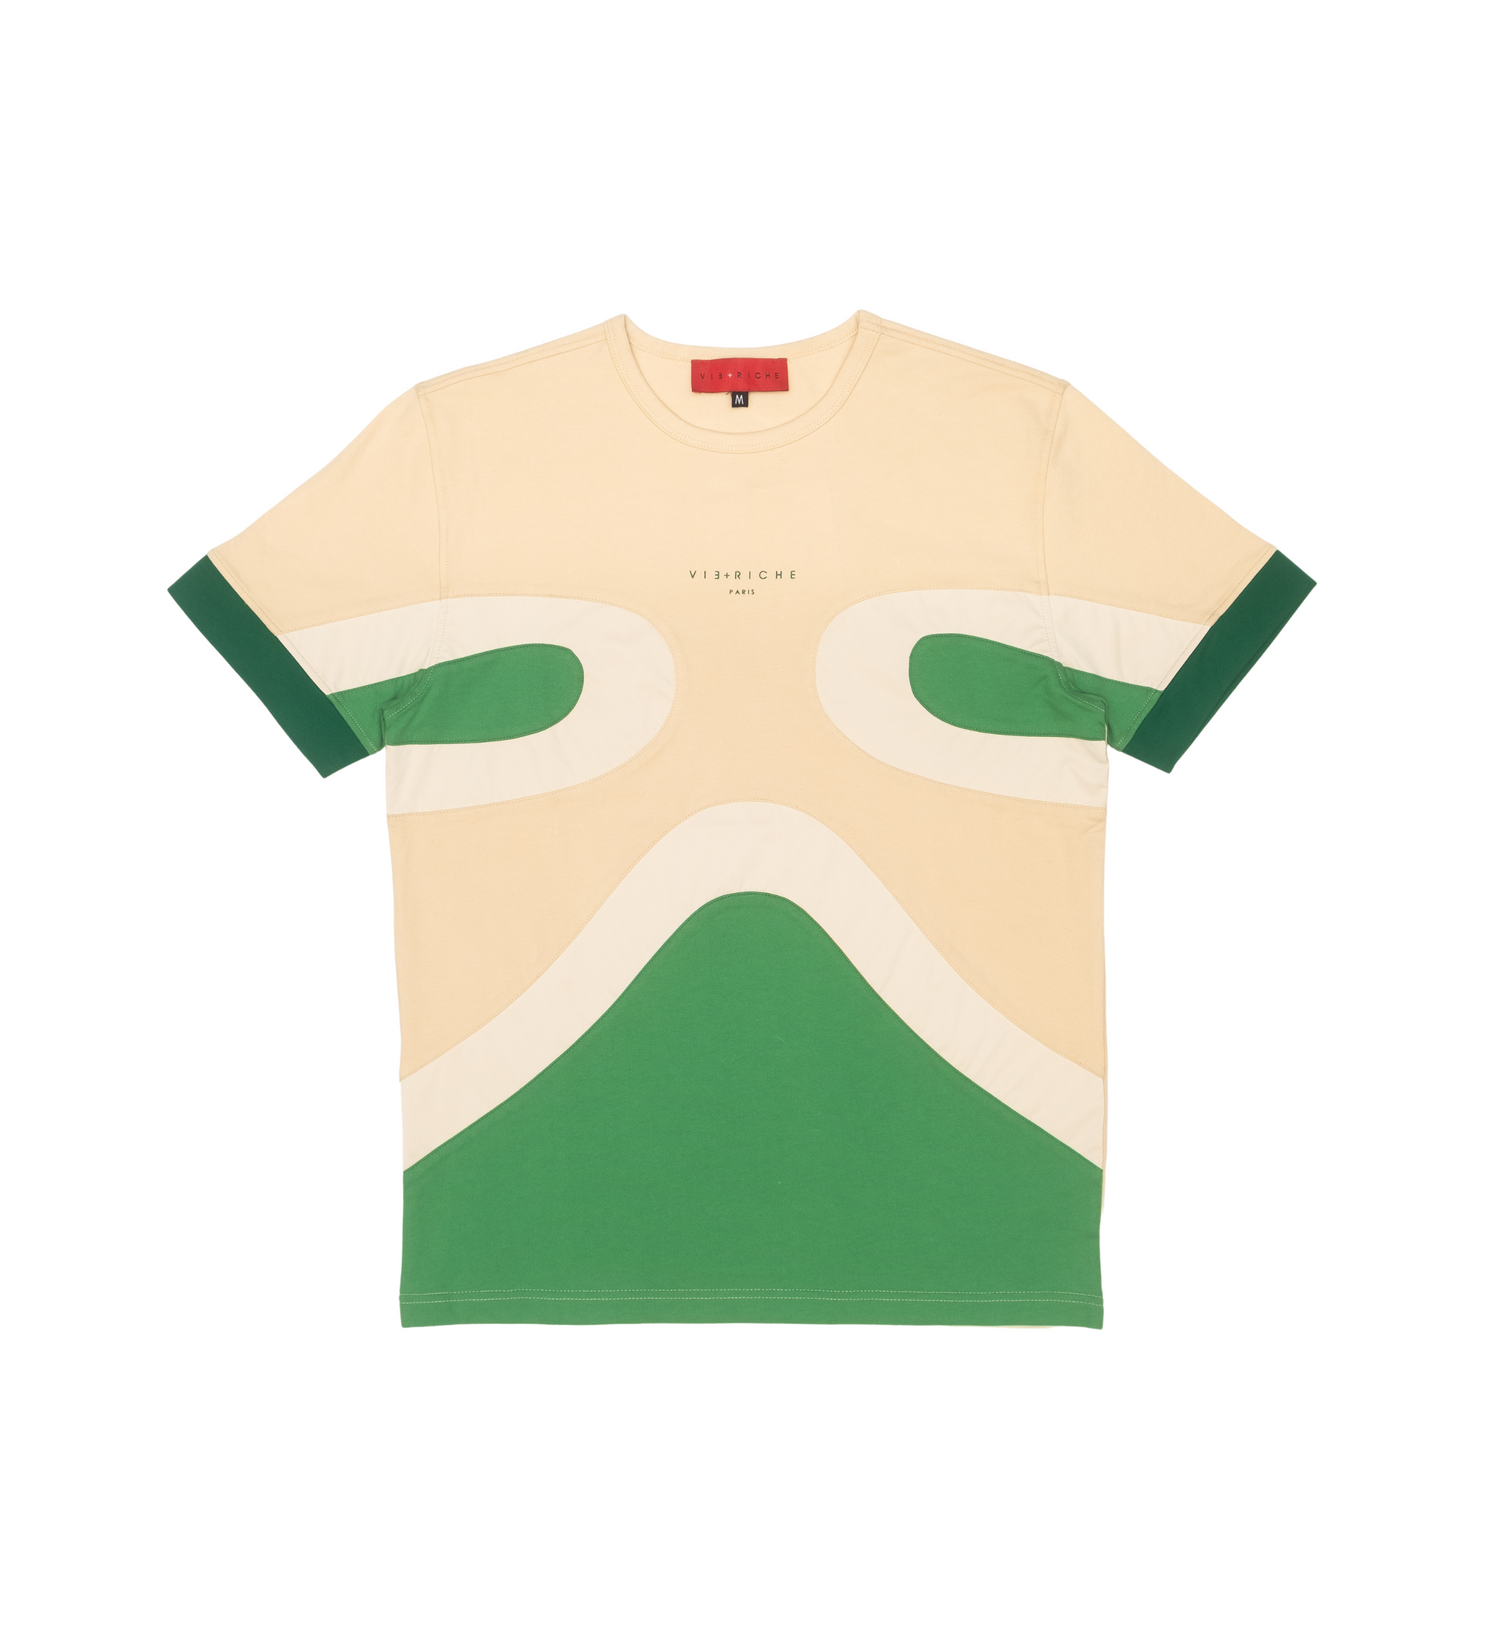 Wave hill tee